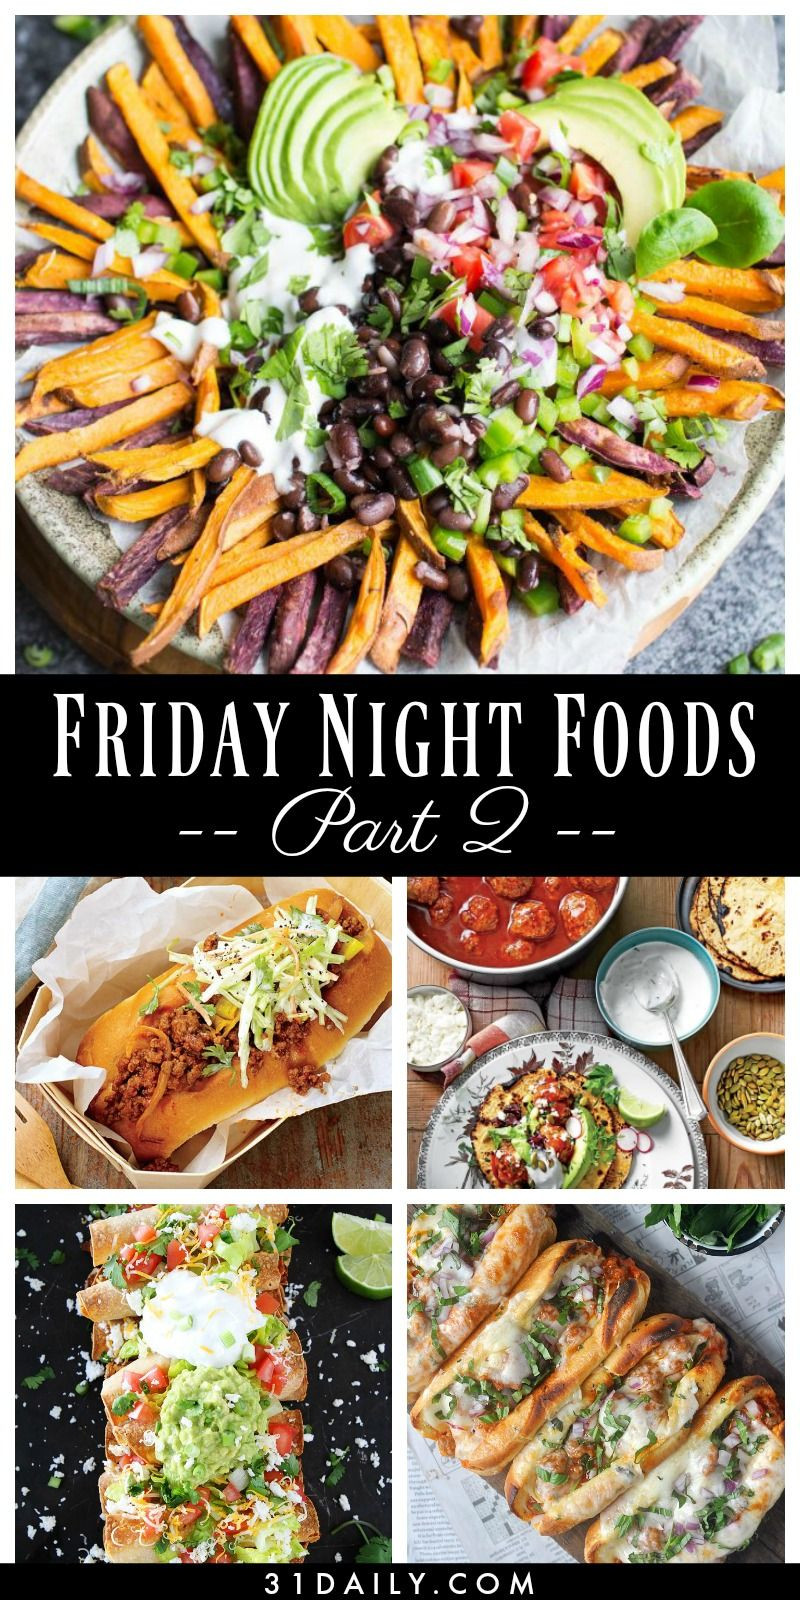 Friday Night Dinners Ideas
 Friday Night Foods that are Classic Easy and Amazing